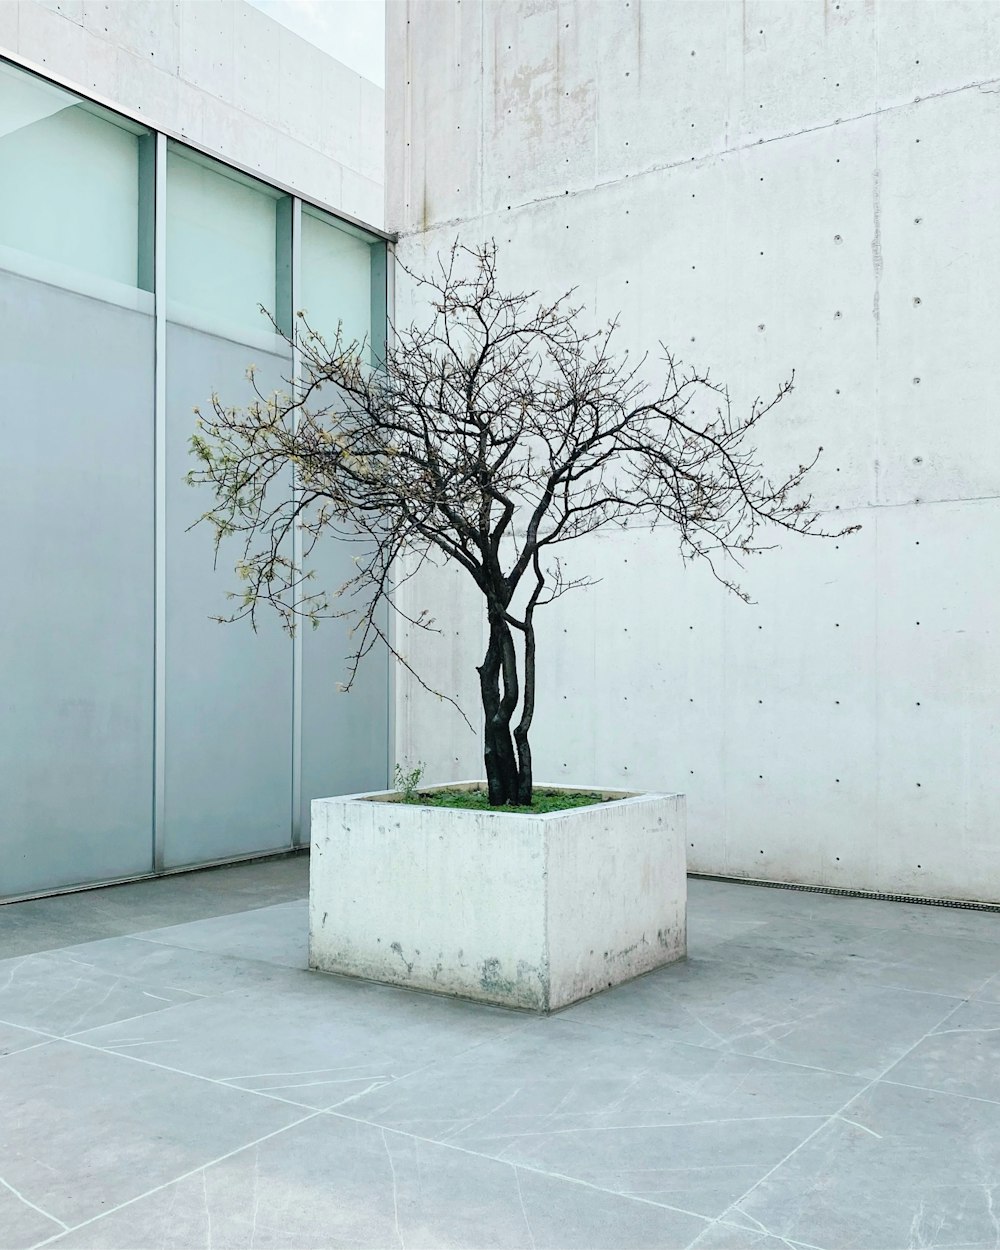 a bonsai tree in a planter in front of a building